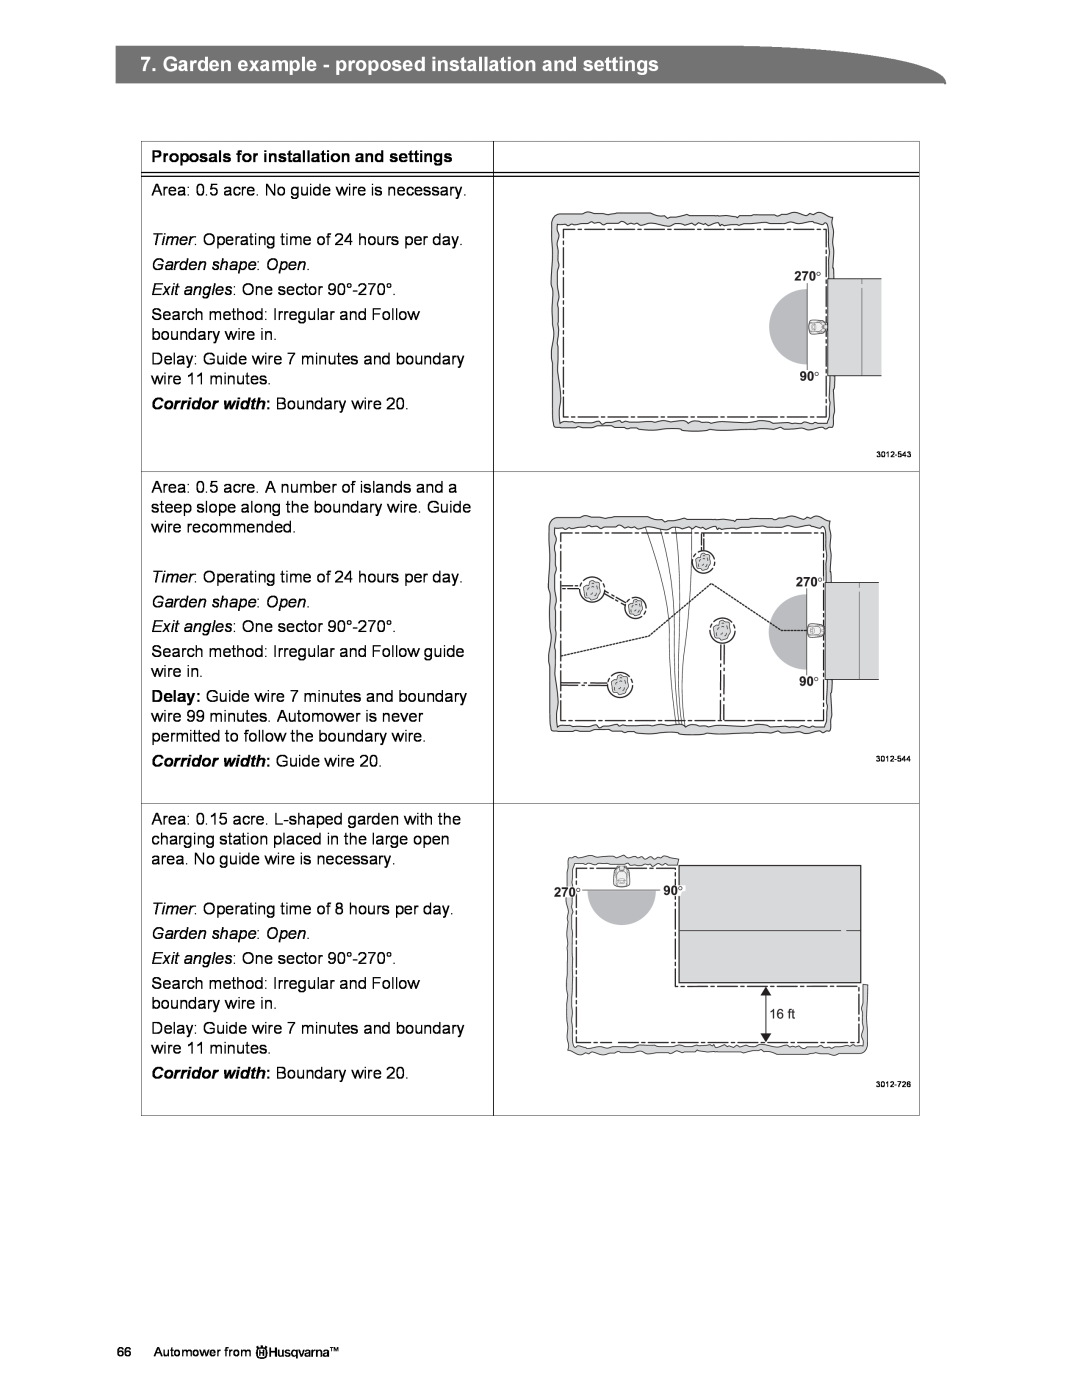 Husqvarna Automower manual Corridor width: Guide wire, Proposals for installation and settings 